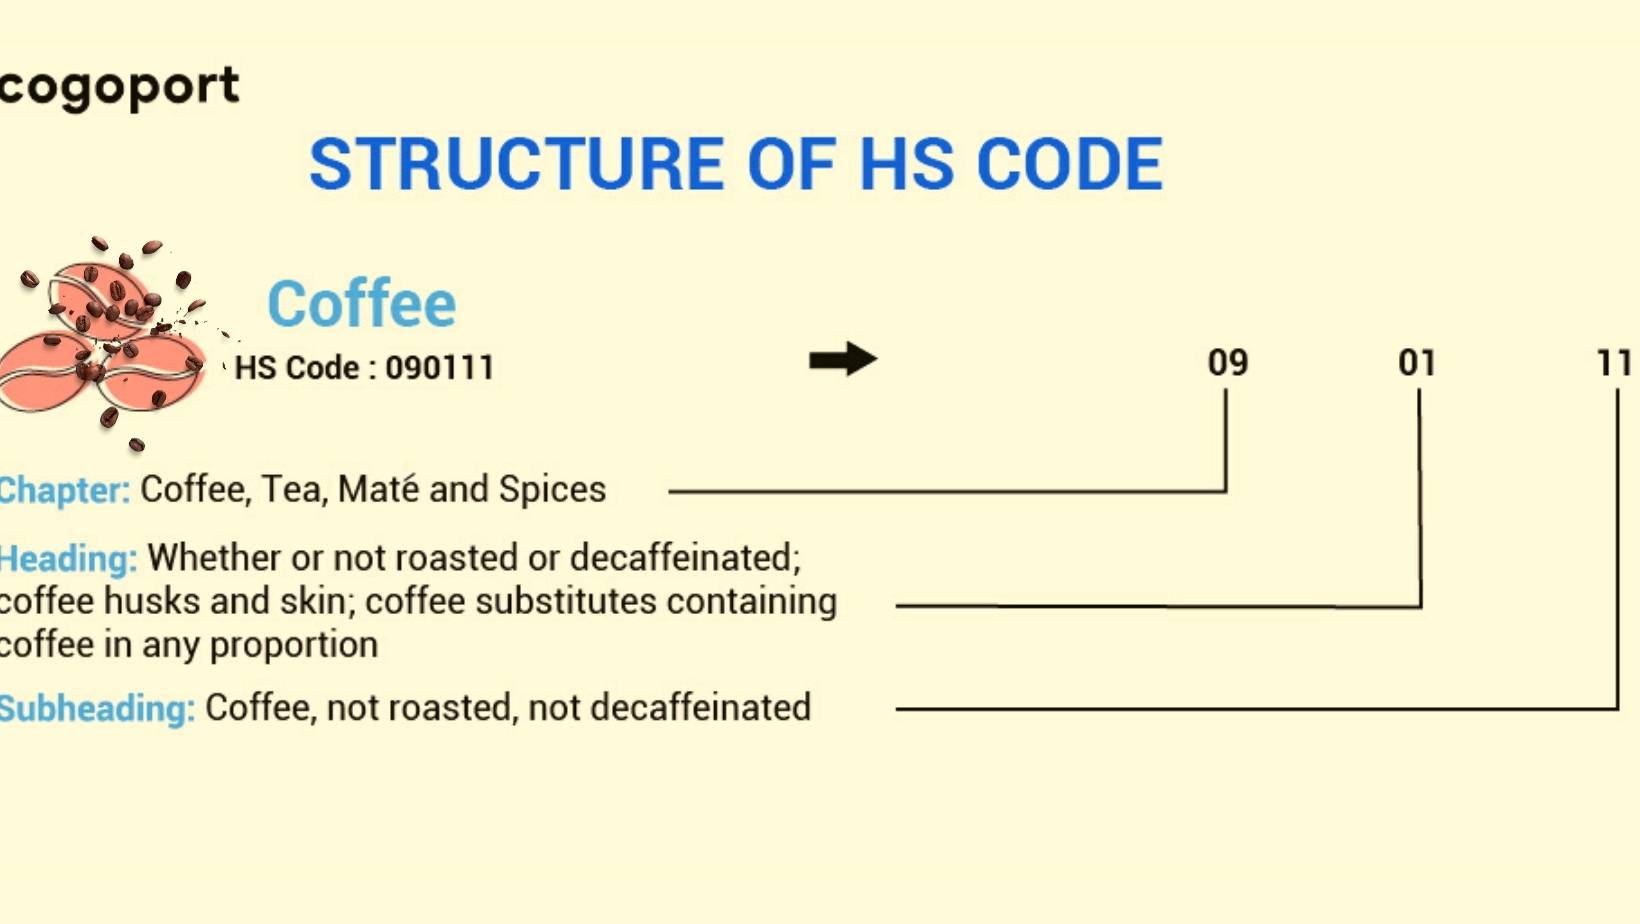 Roasted coffee beans HS code